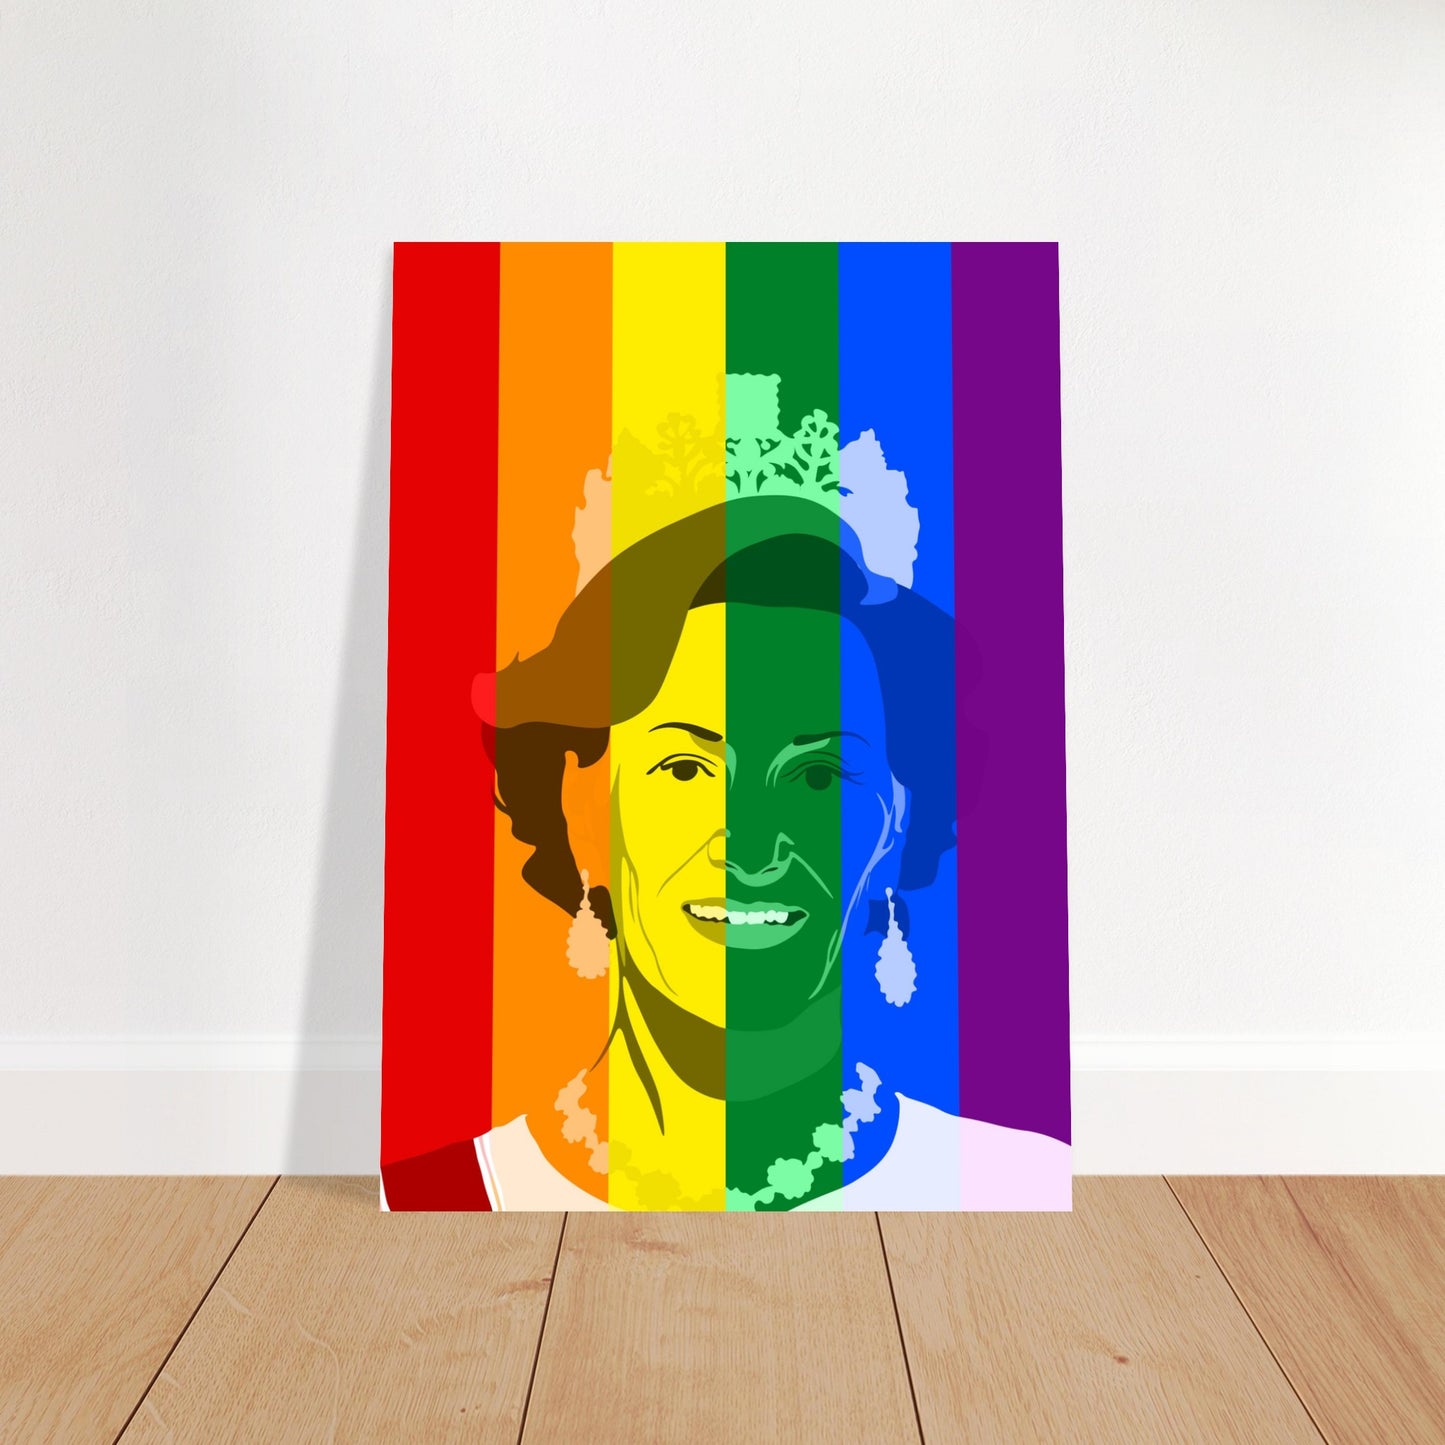 Dronning Sonja pride poster